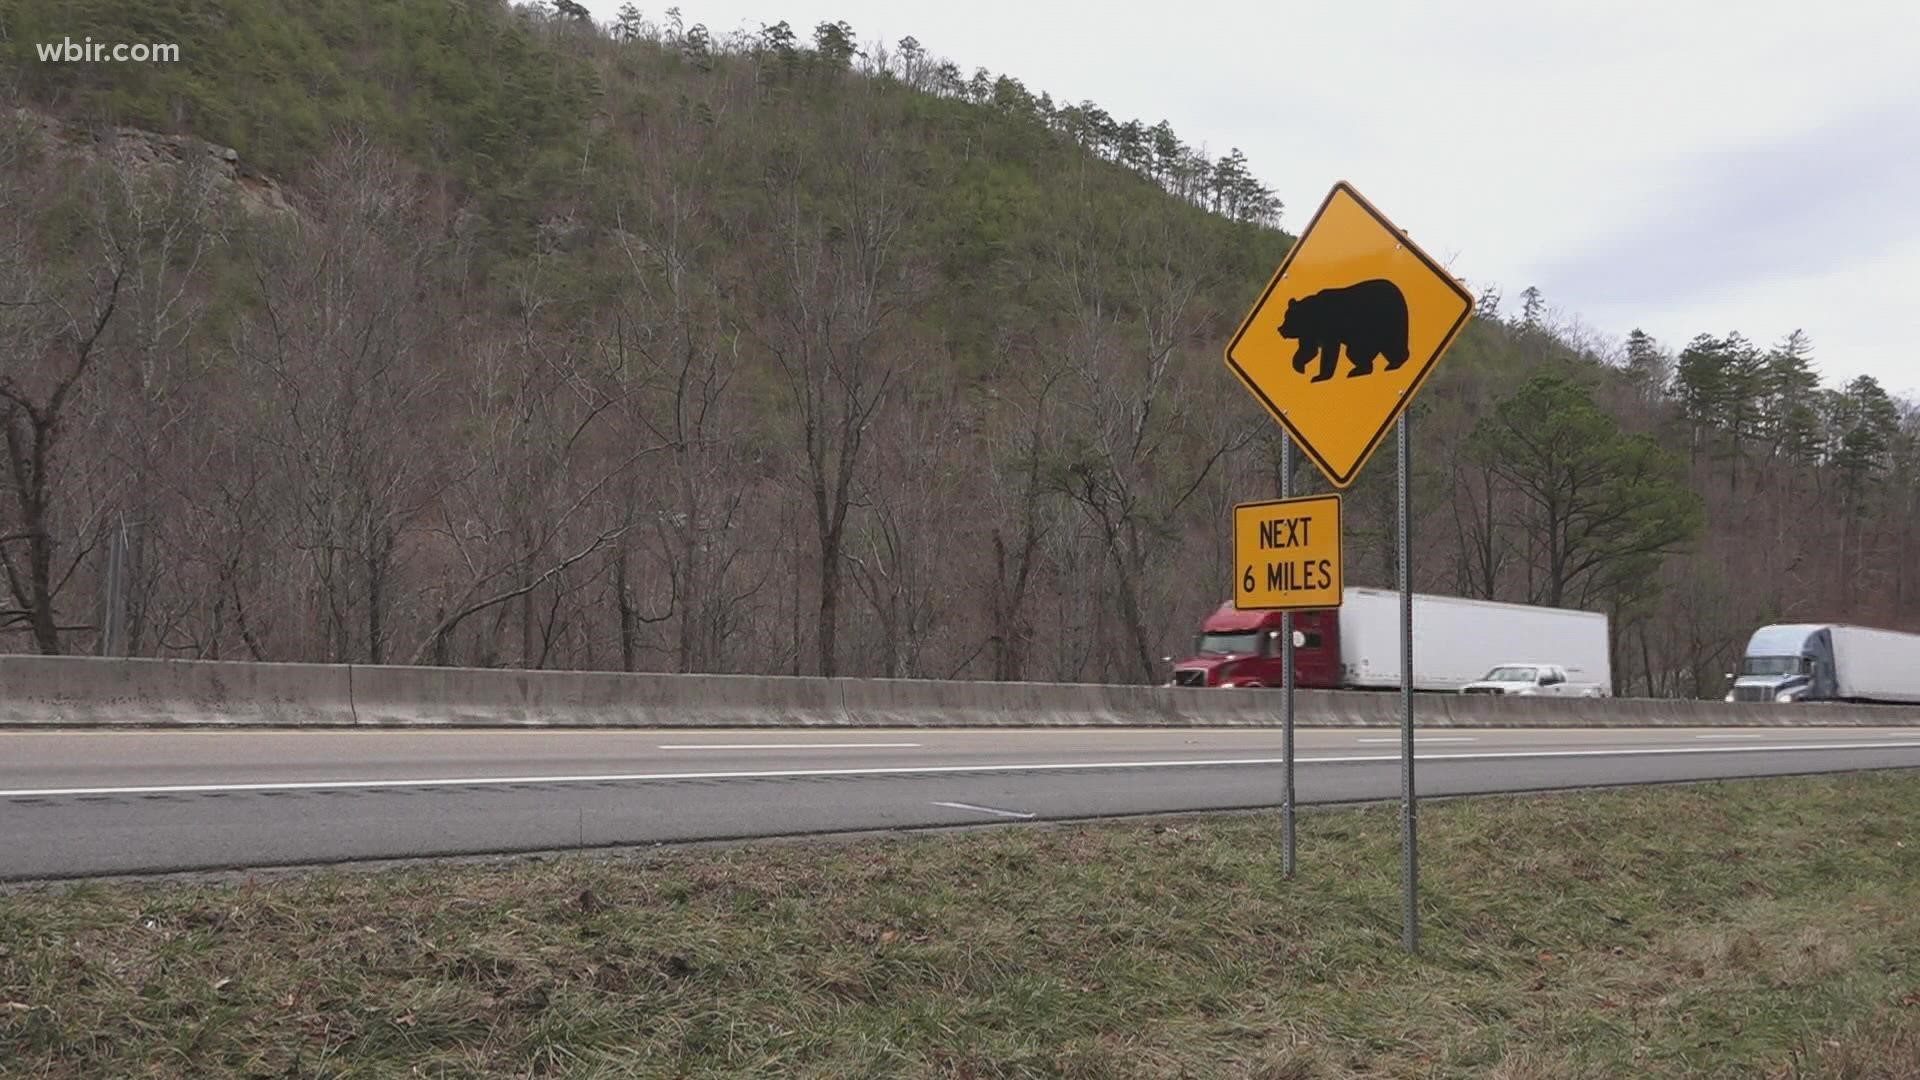 I-40 is getting a wildlife underpass near the Pigeon River Gorge. It may save lives, but in the meantime, it will cause major detours for drivers.